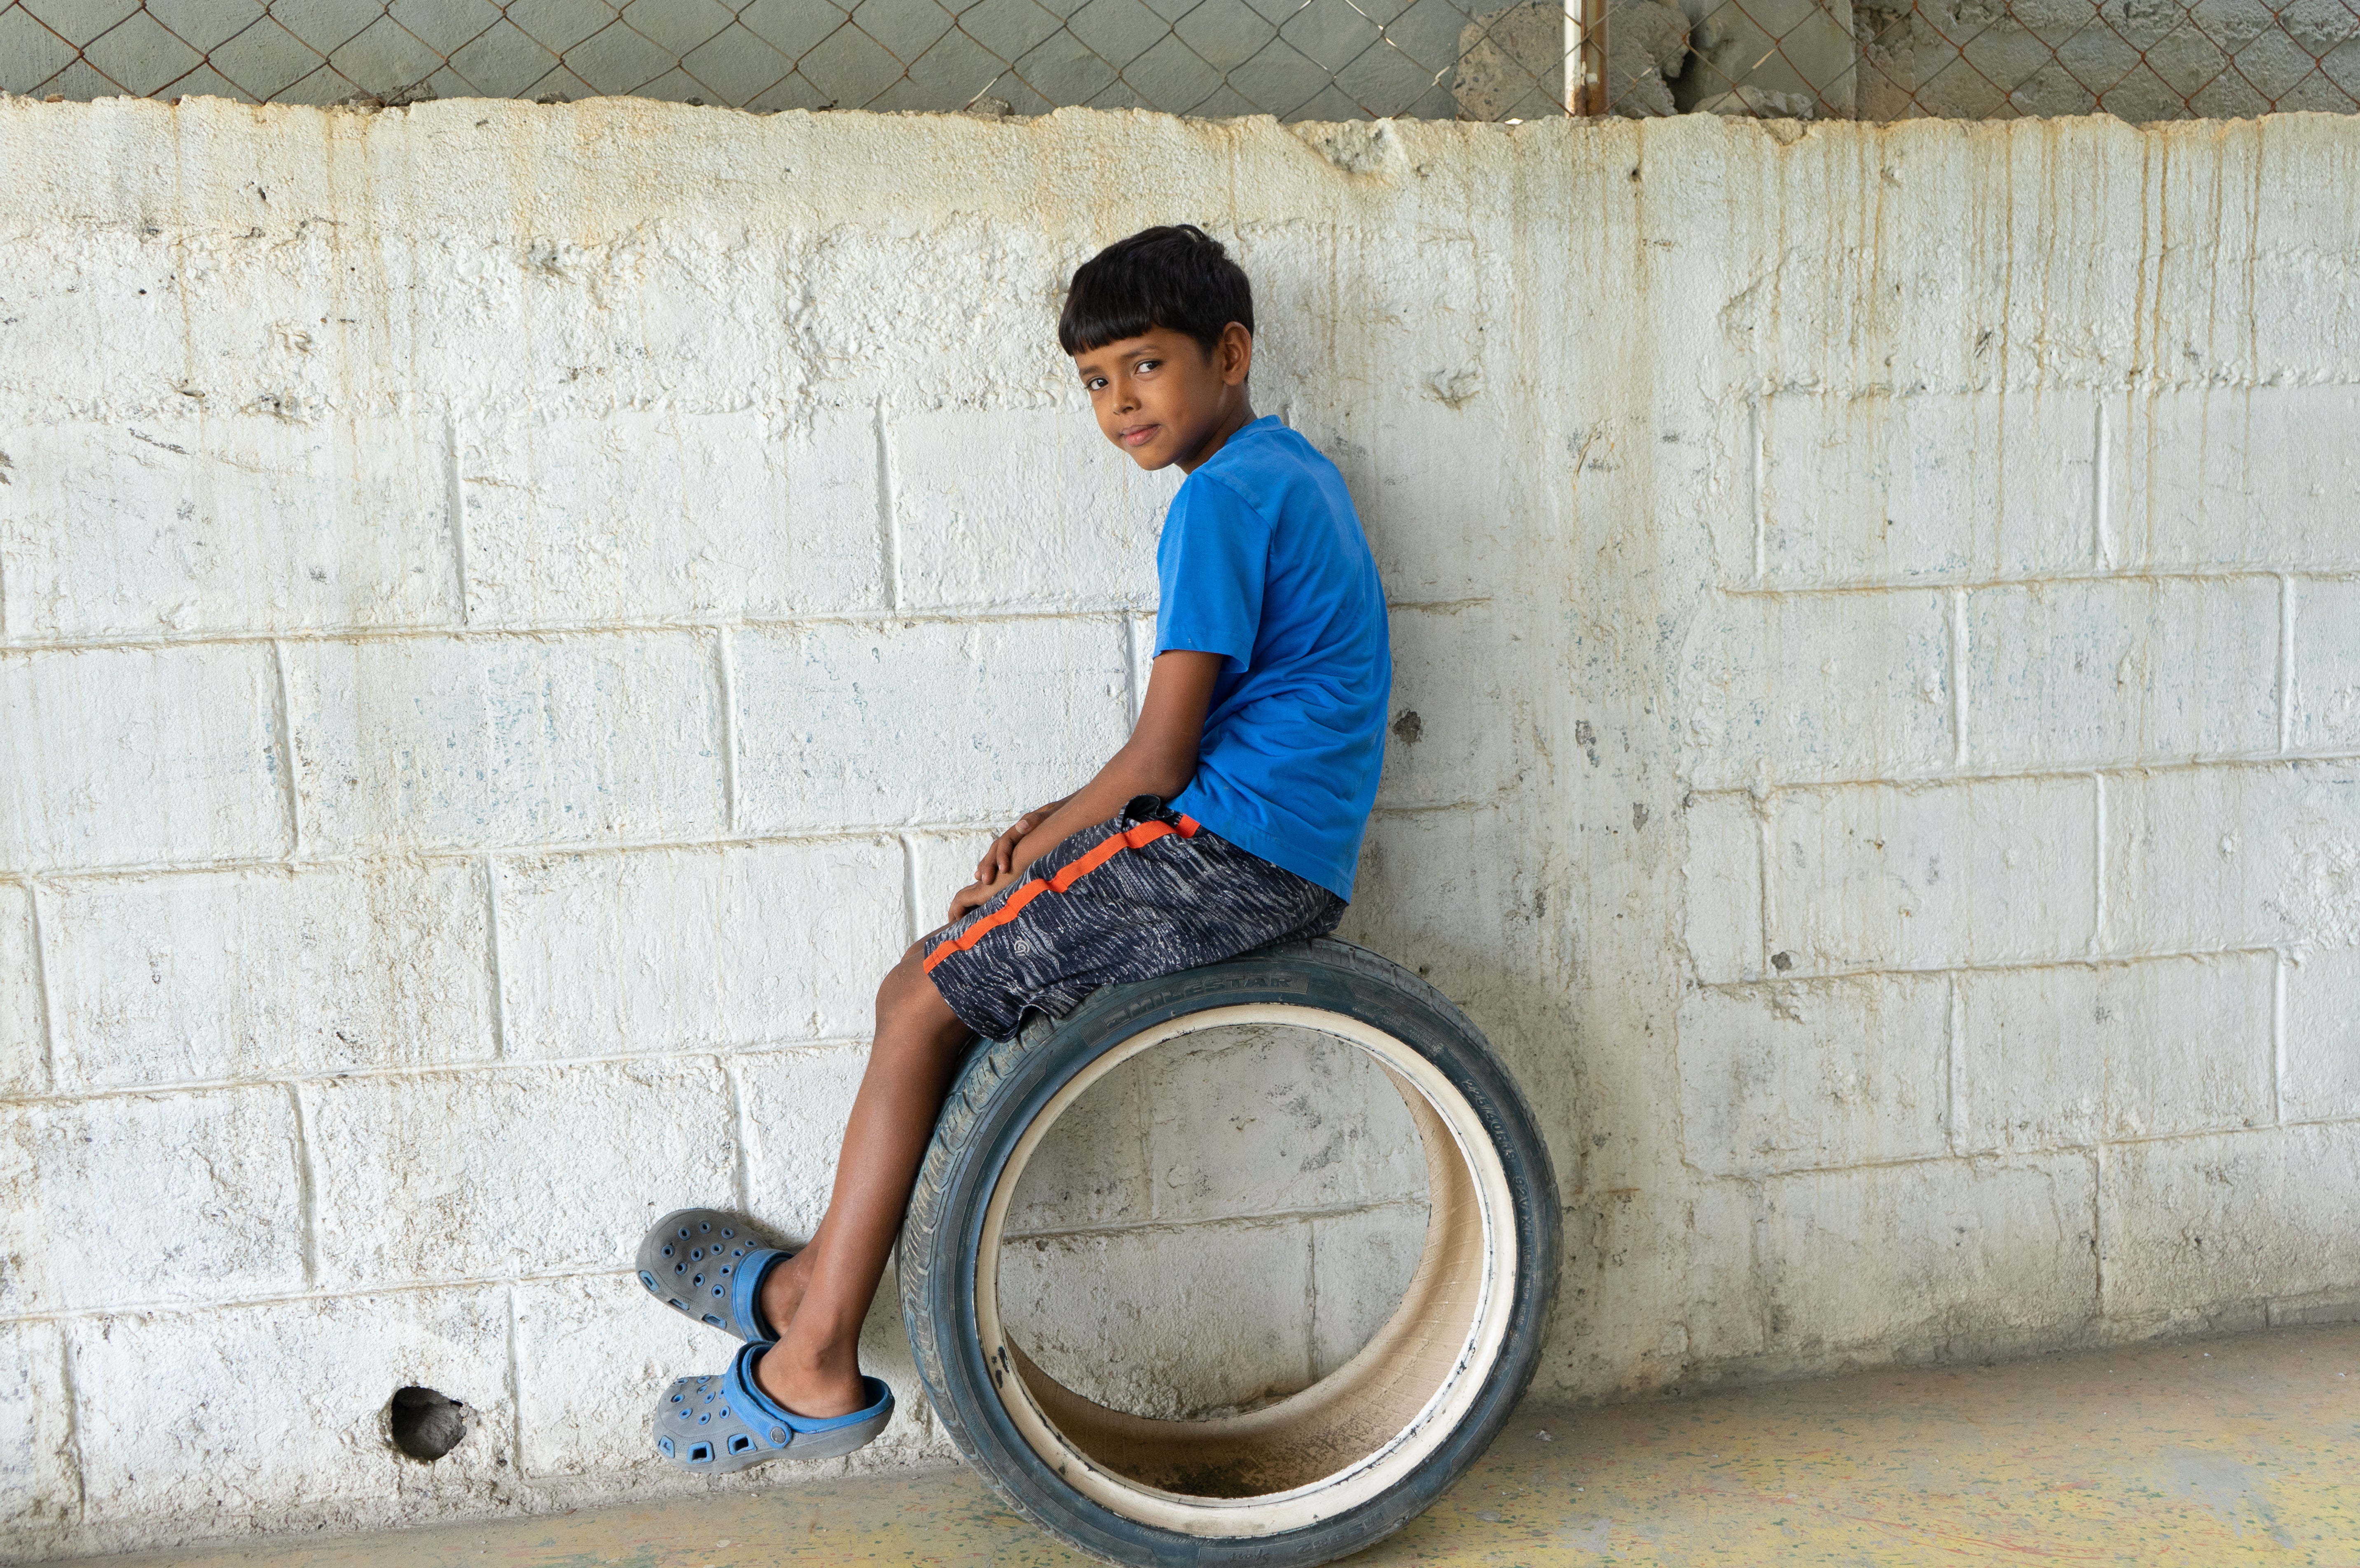 In Honduras a young boy sits on a tire against a white cement wall.  